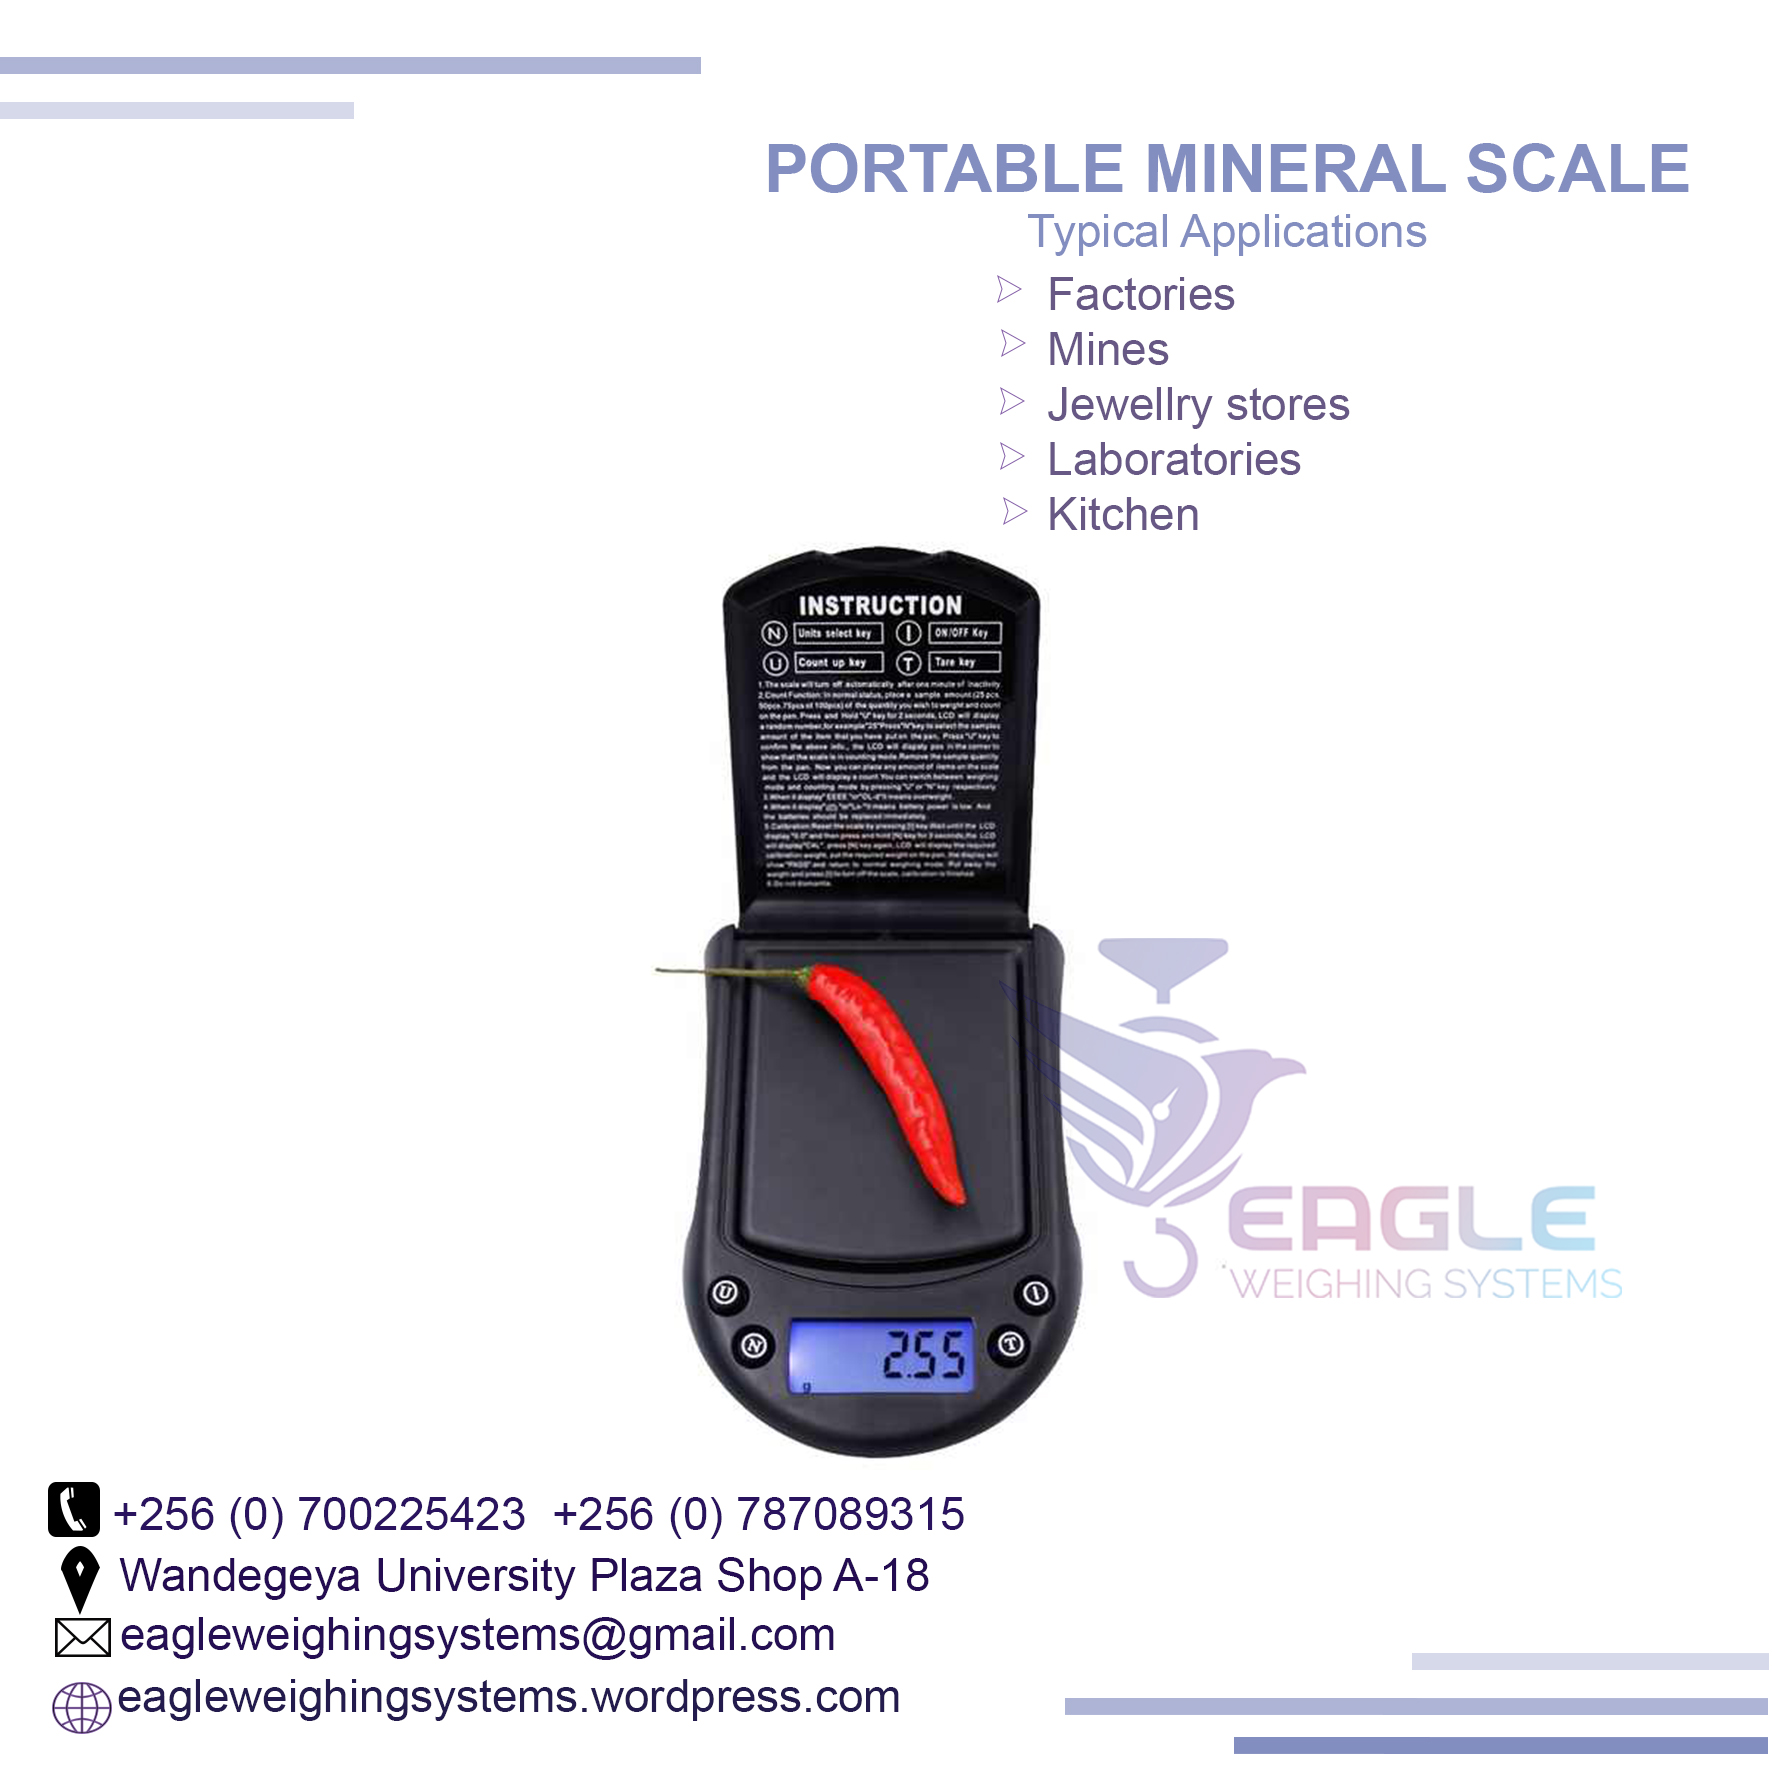 Portable mineral, jewelry Nutrition weighing scales in Kampala Uganda, Kampala Central Division, Central, Uganda